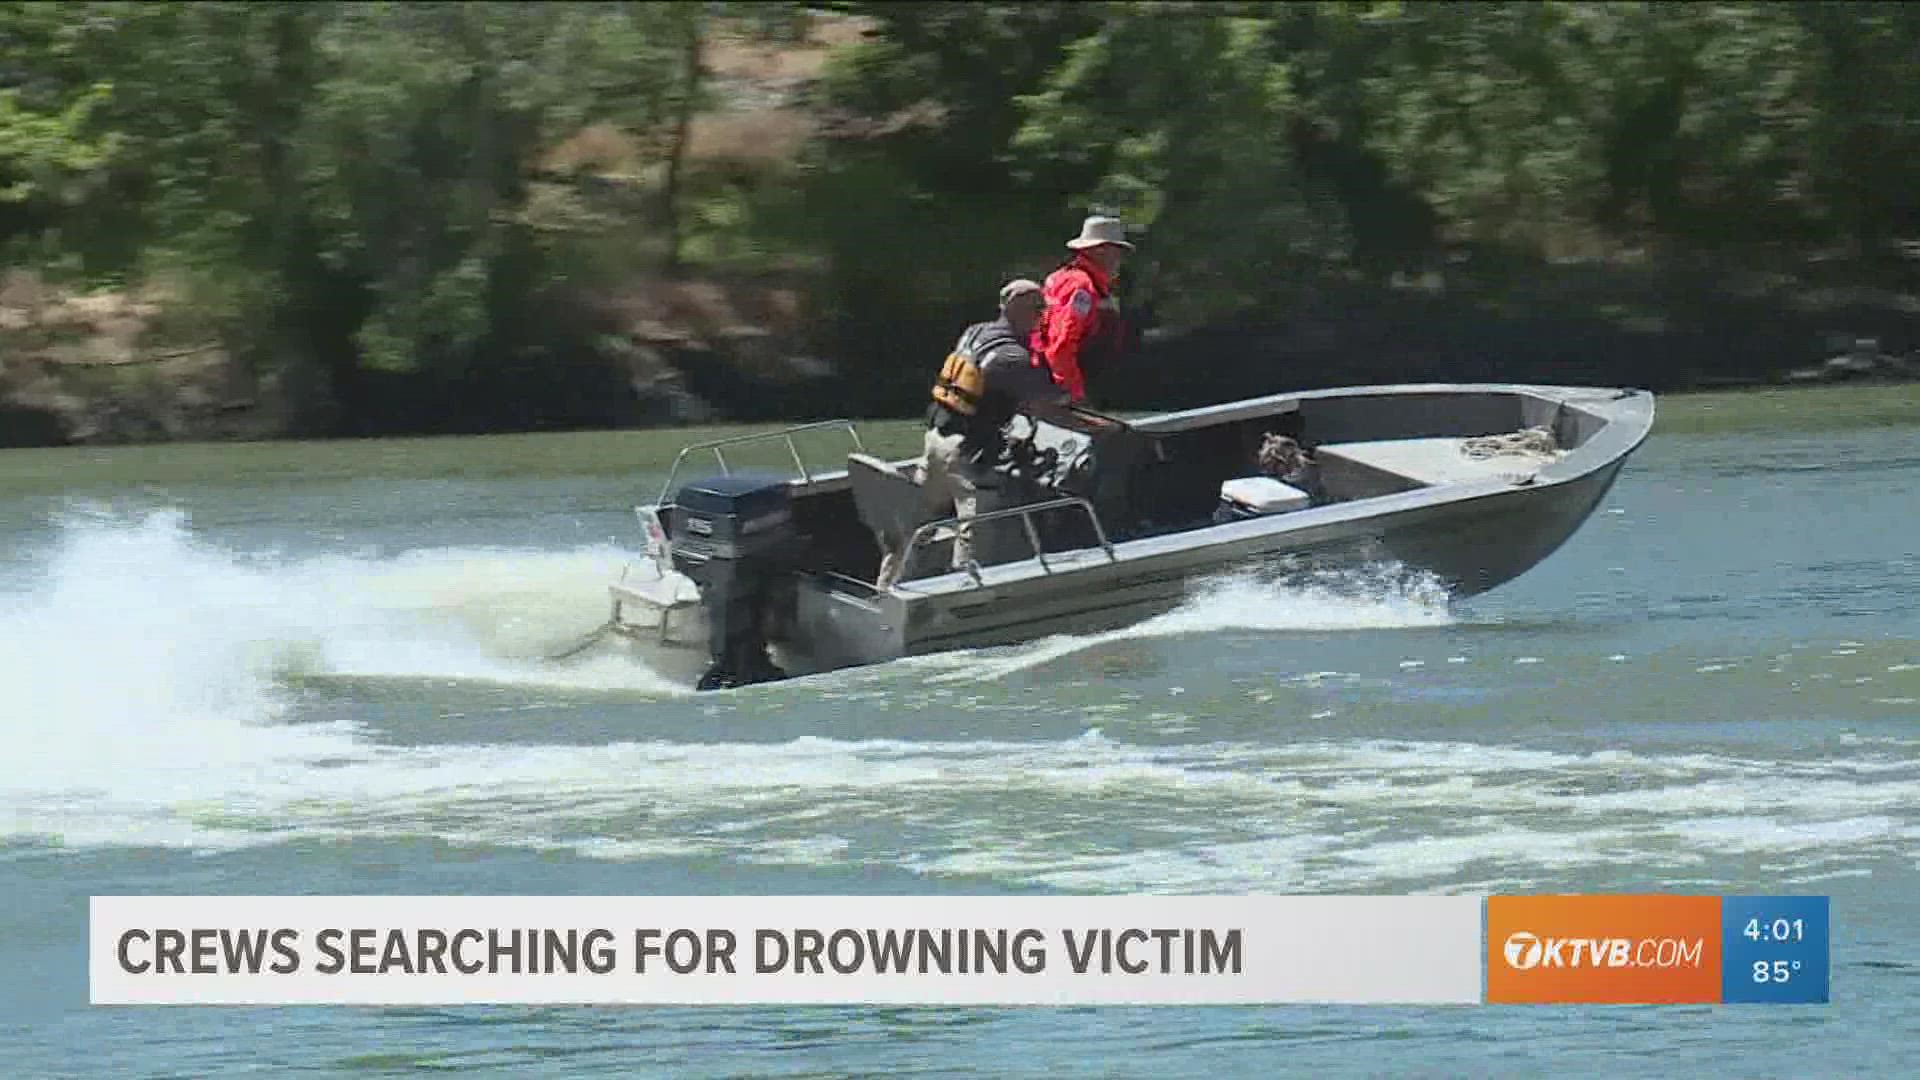 The Washington County Sheriff's Office says the drowning occurred Wednesday night about four miles from Weiser.